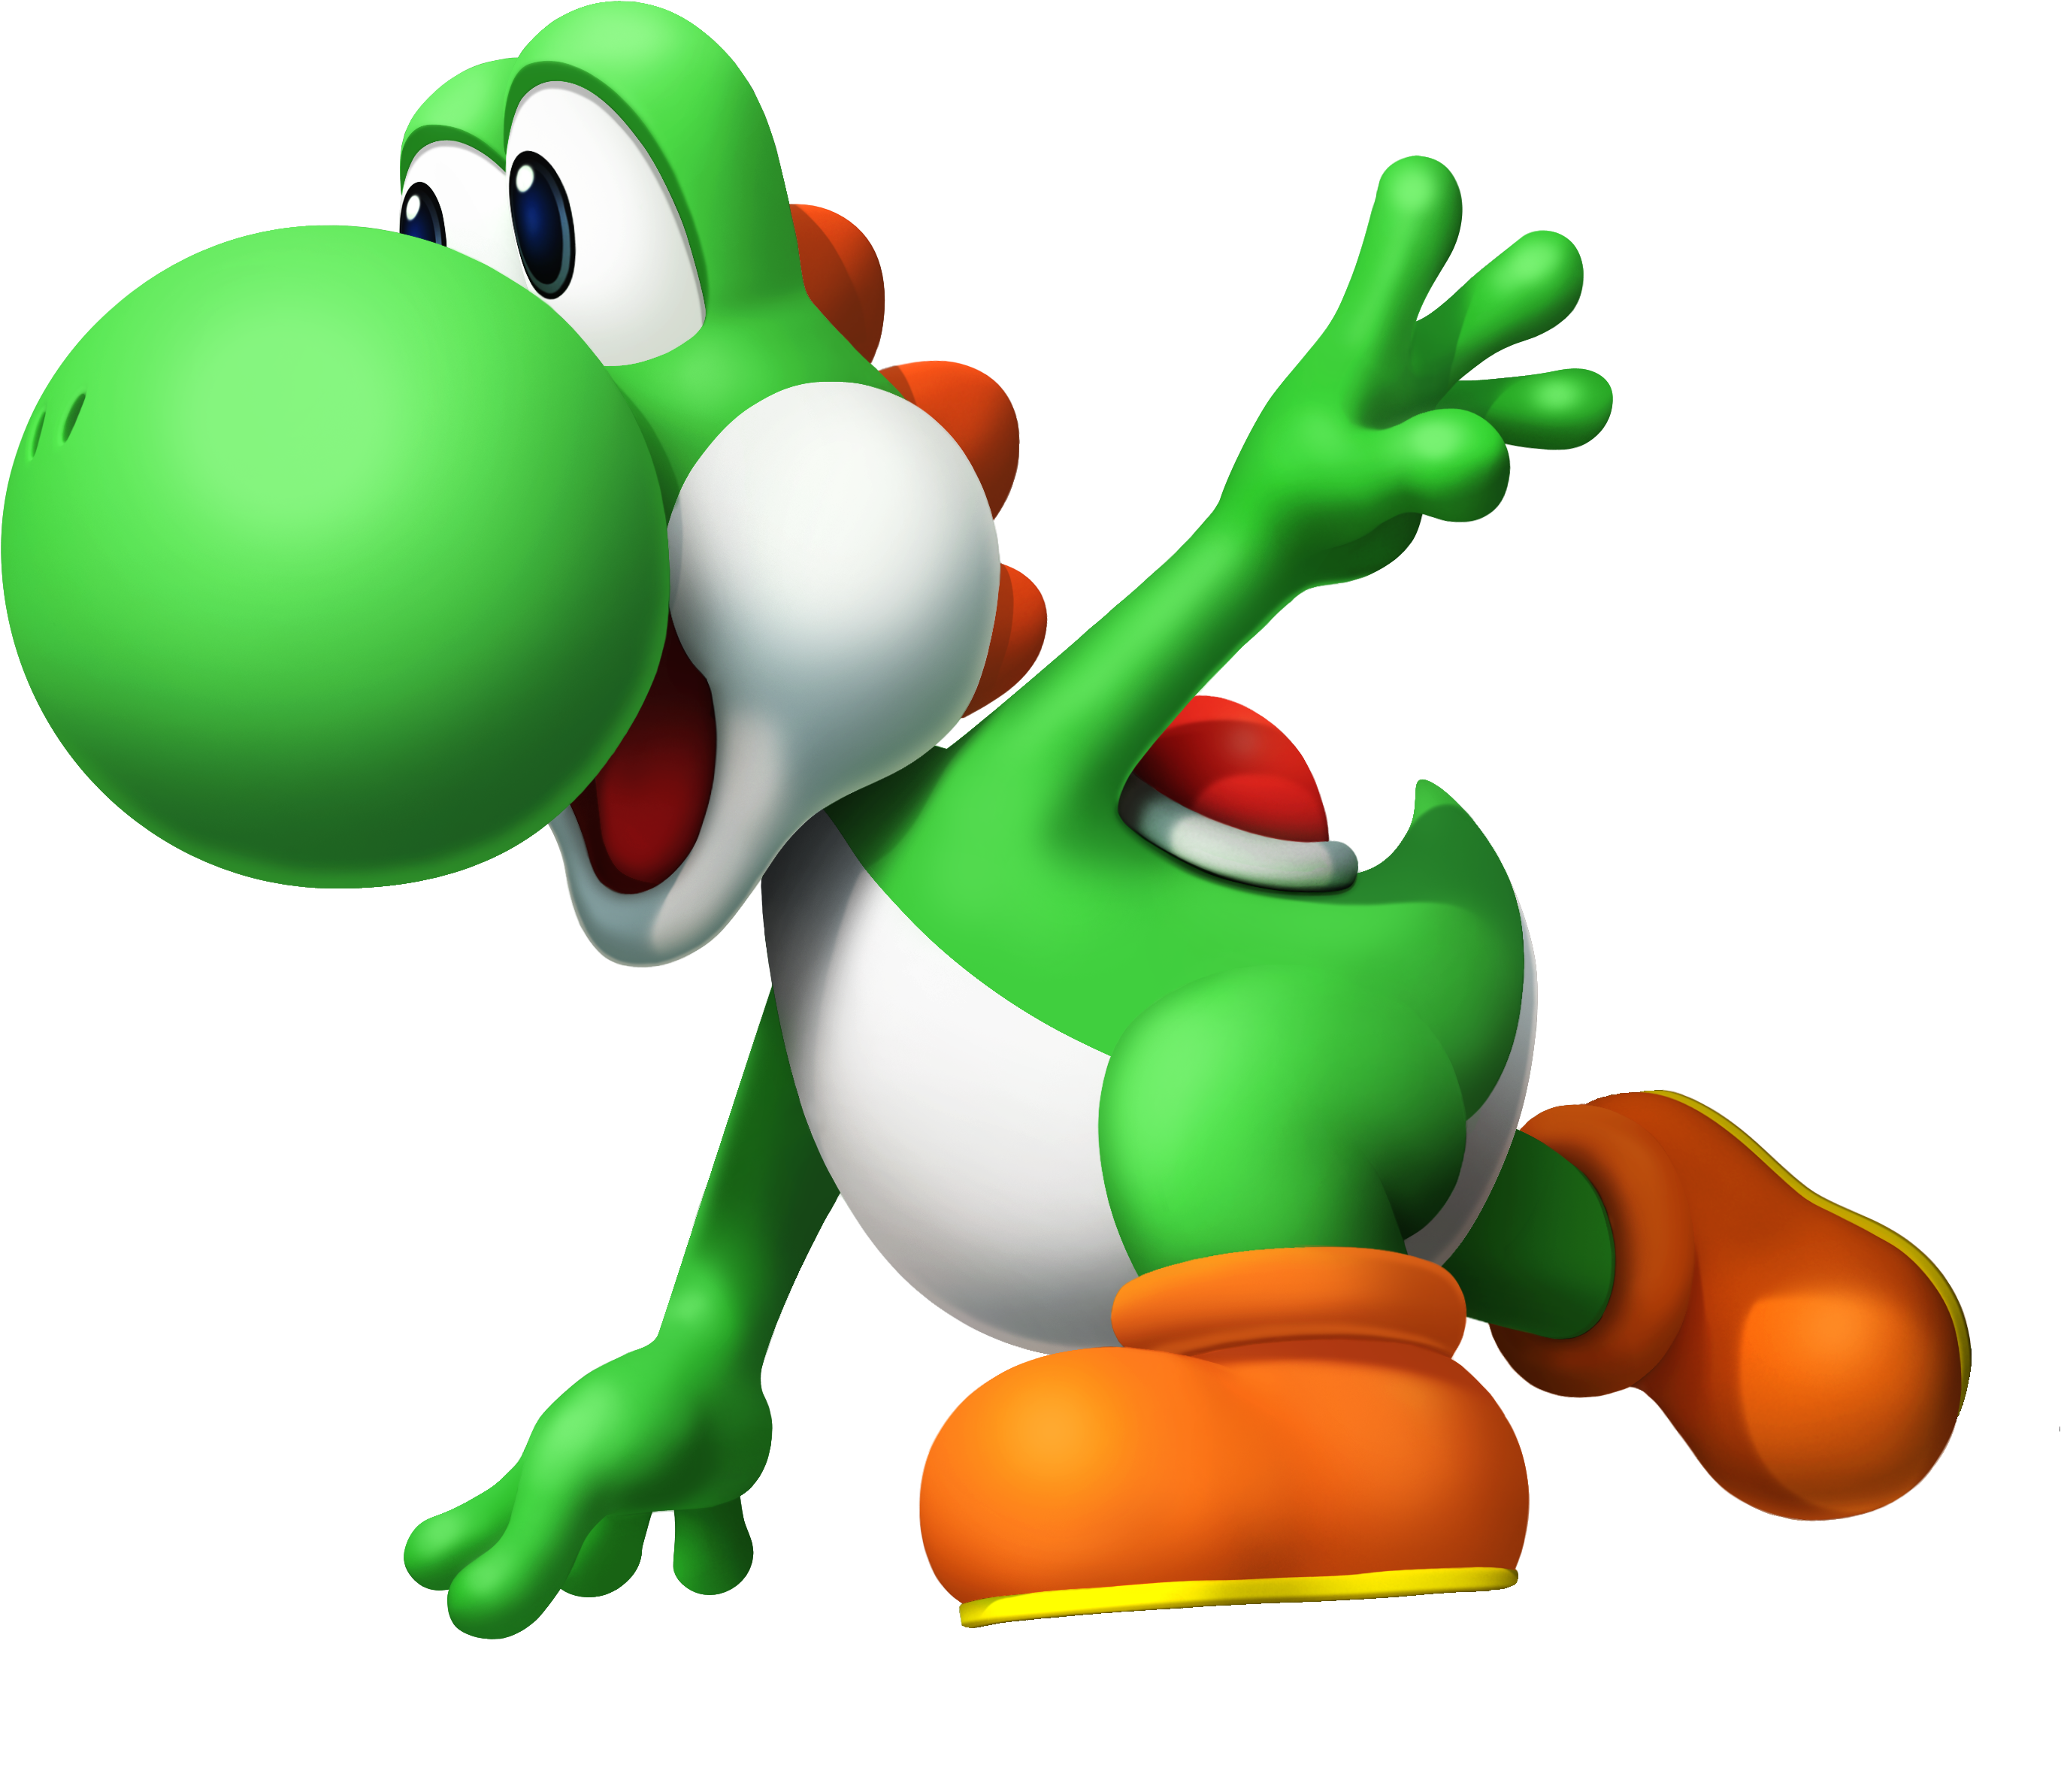 Yoshi Backgrounds, Compatible - PC, Mobile, Gadgets| 2742x2384 px